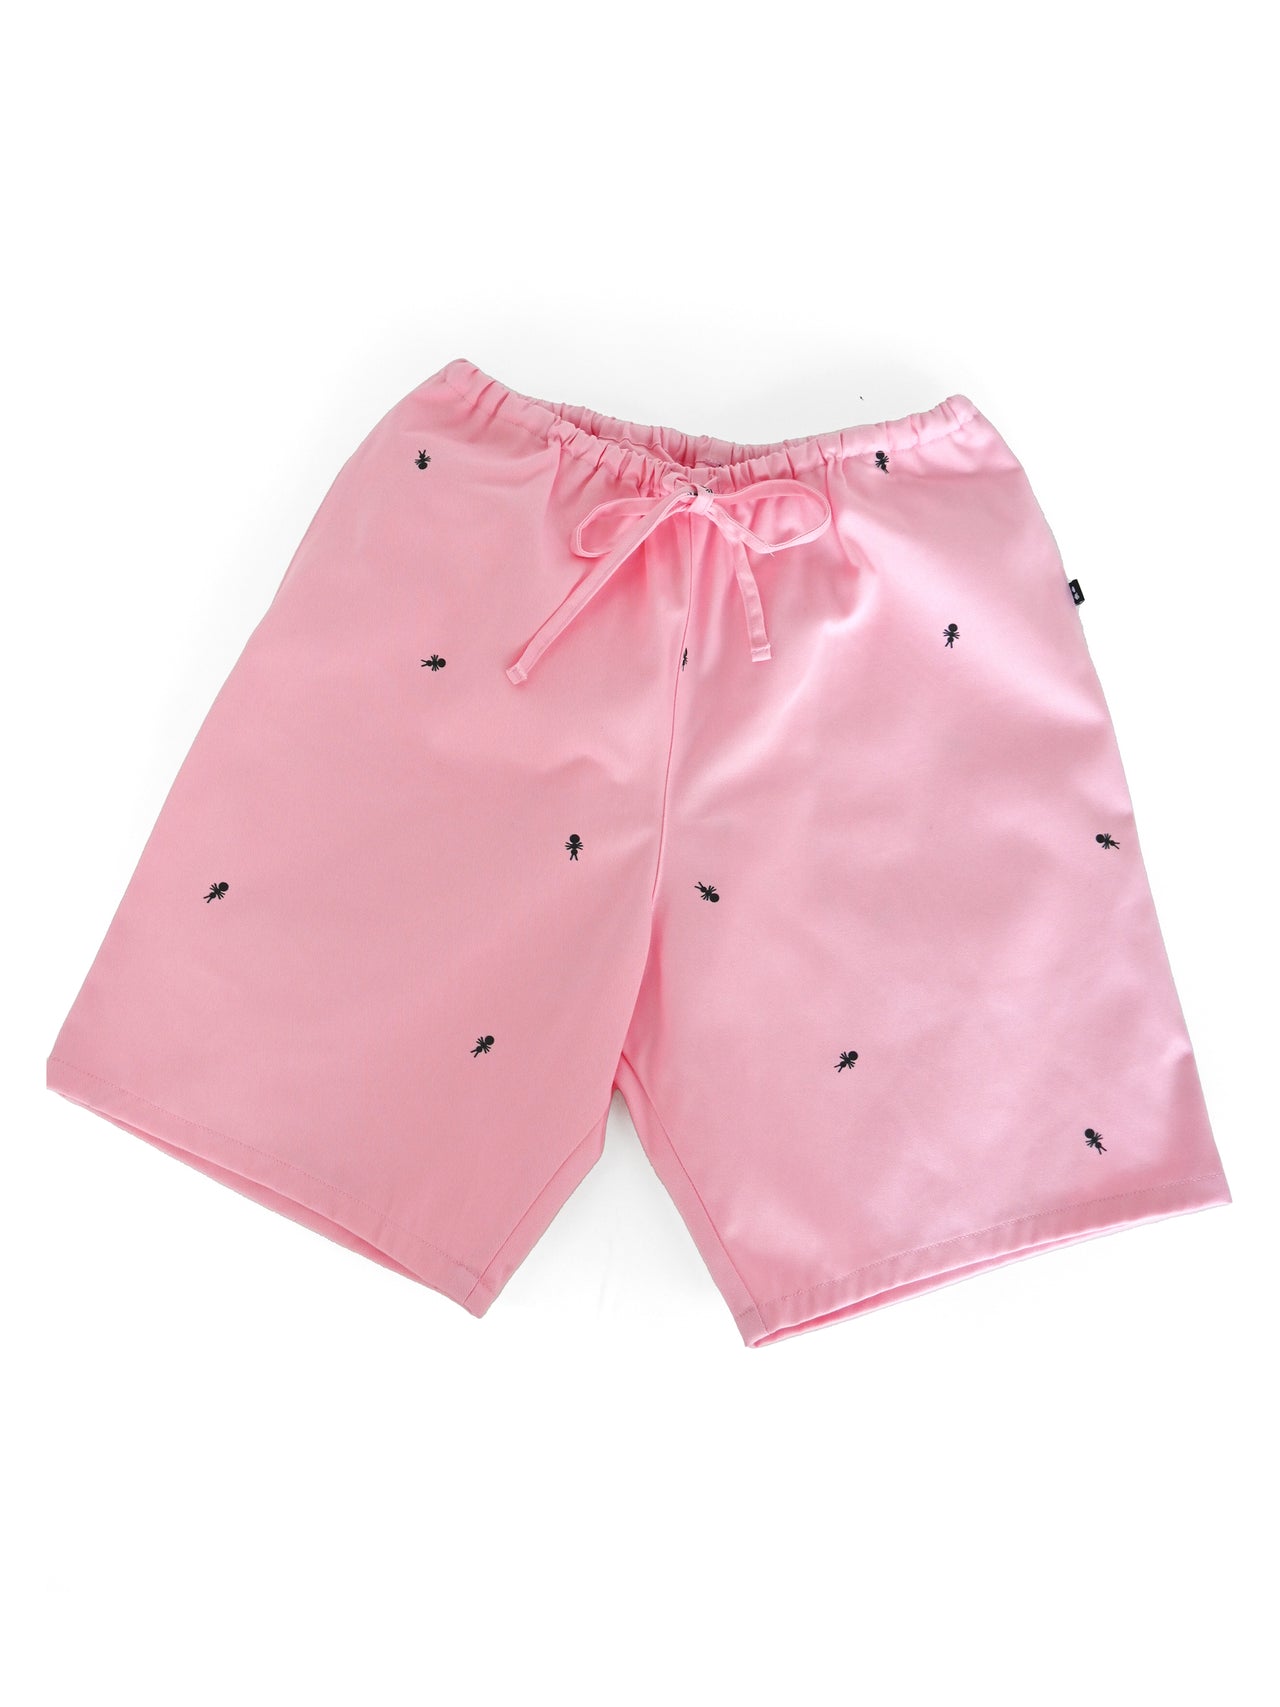 HO HOS HOLE IN THE WALL brand  "Ants on Your Pants" Shorts. Pink Lemonade colorway